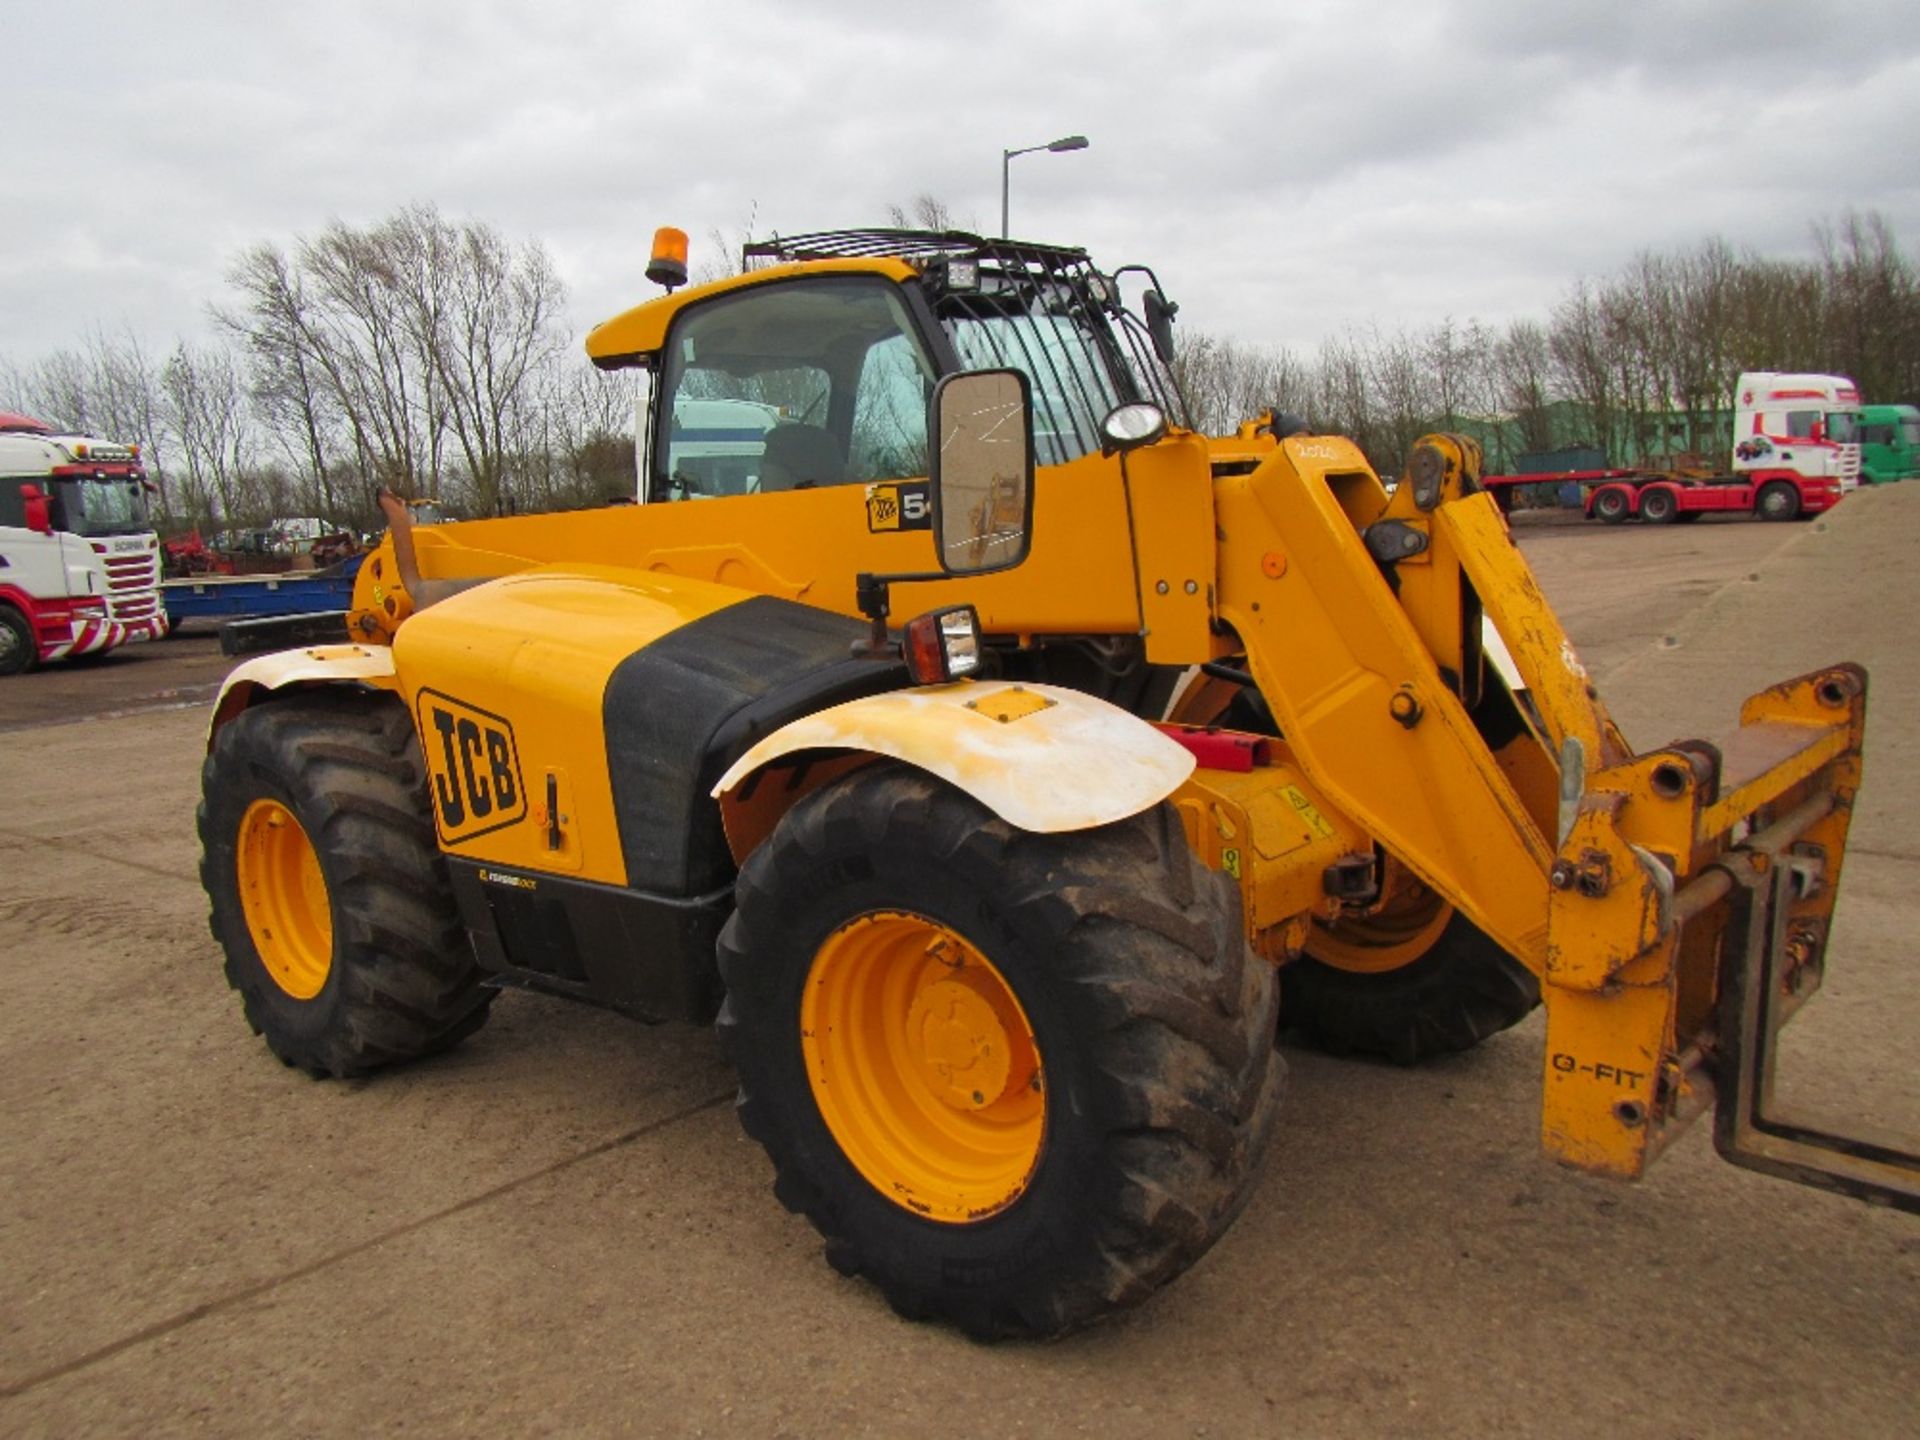 2006 JCB 541-70 Telehandler with Pick Up Hitch & Pallet Tines - Image 3 of 8